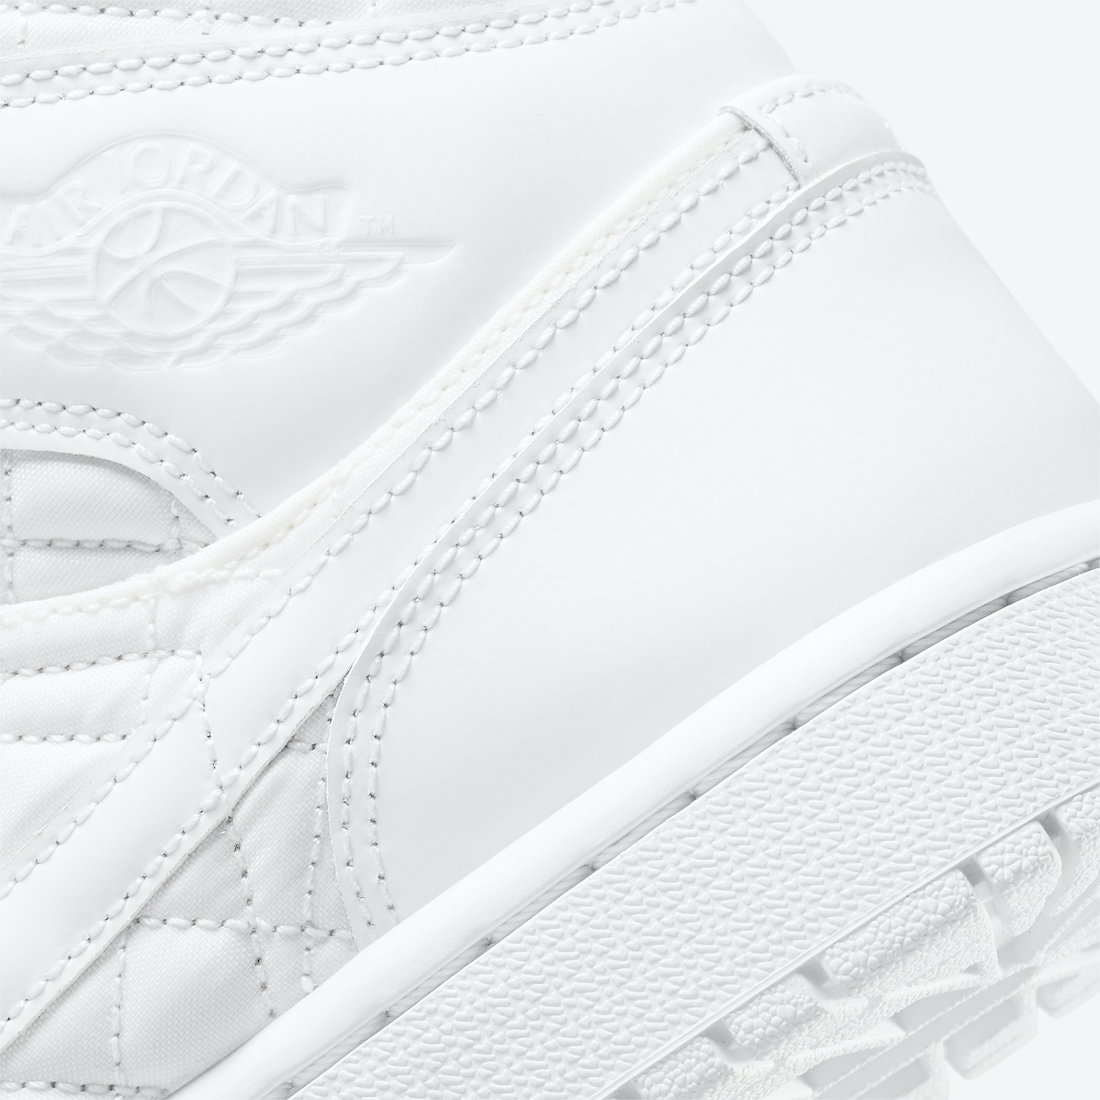 Air Jordan 1 Mid White Quilted DB6078-100 Release Date